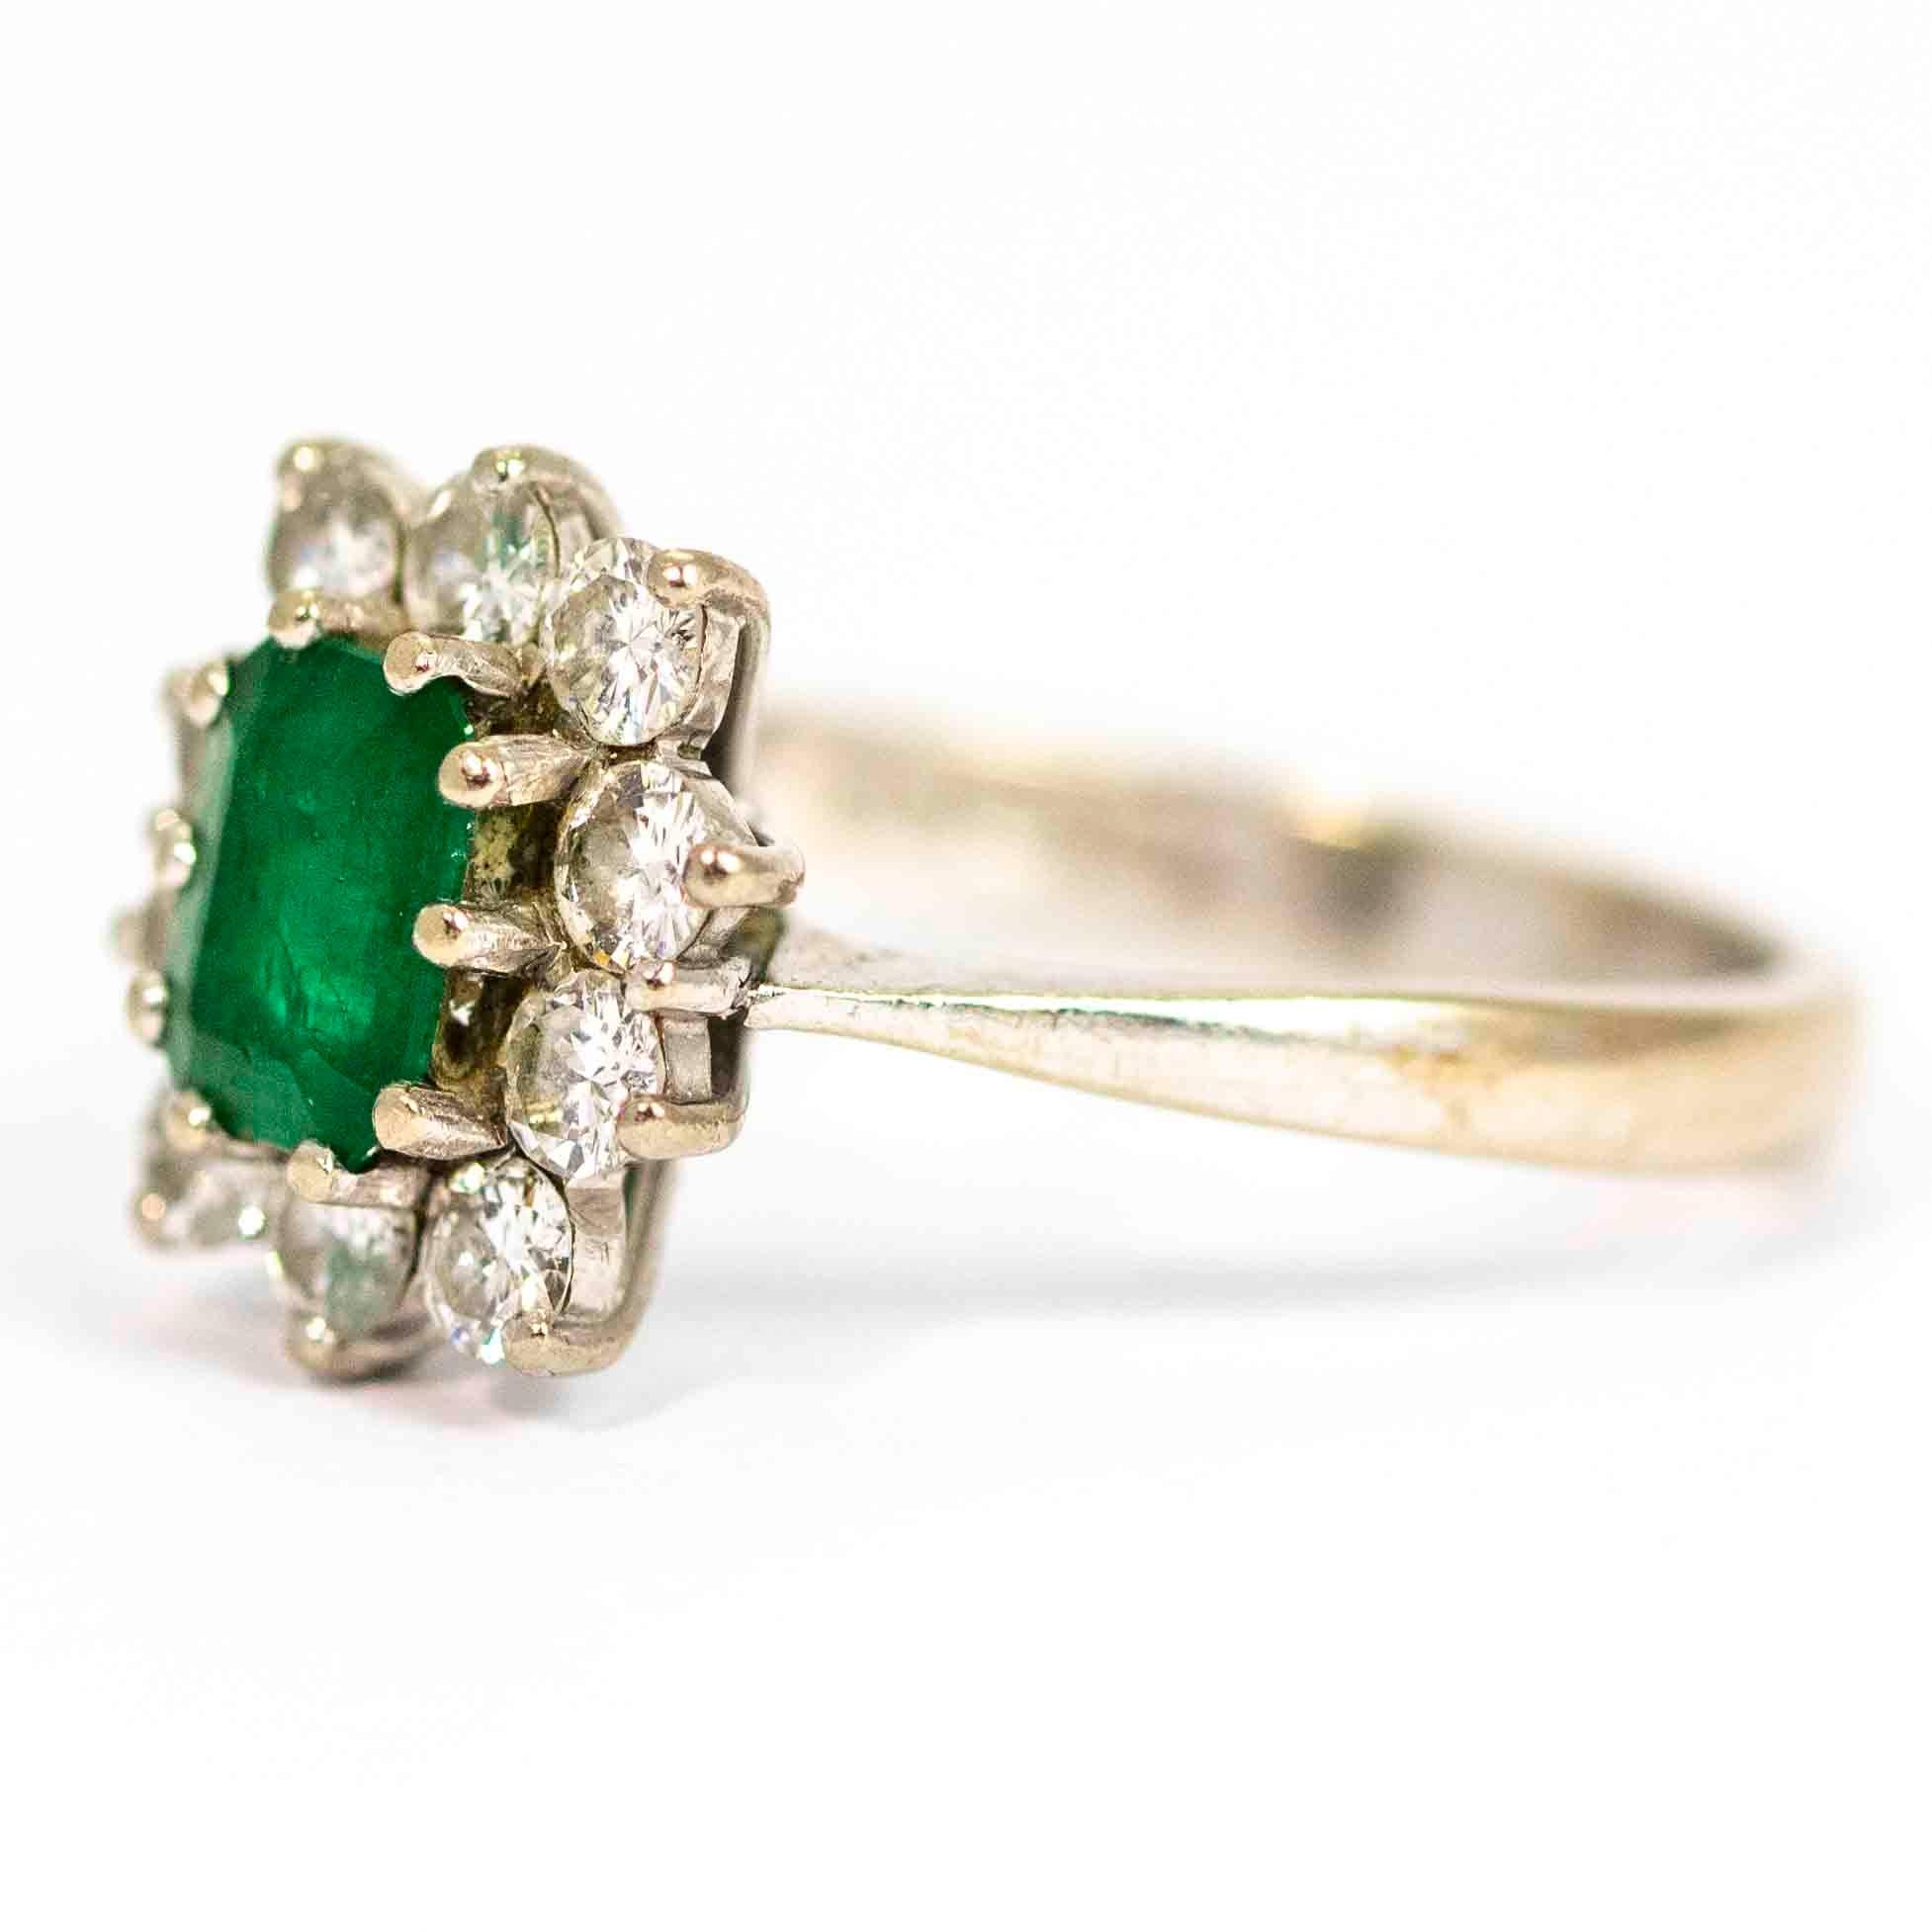 An exquisite vintage rectangle cluster ring. Centrally set with a wonderful green emerald measuring approximately 75 points, surrounded by 10 beautiful round cut diamonds. The total diamond weight in this ring is approximately 50 points. Modelled in